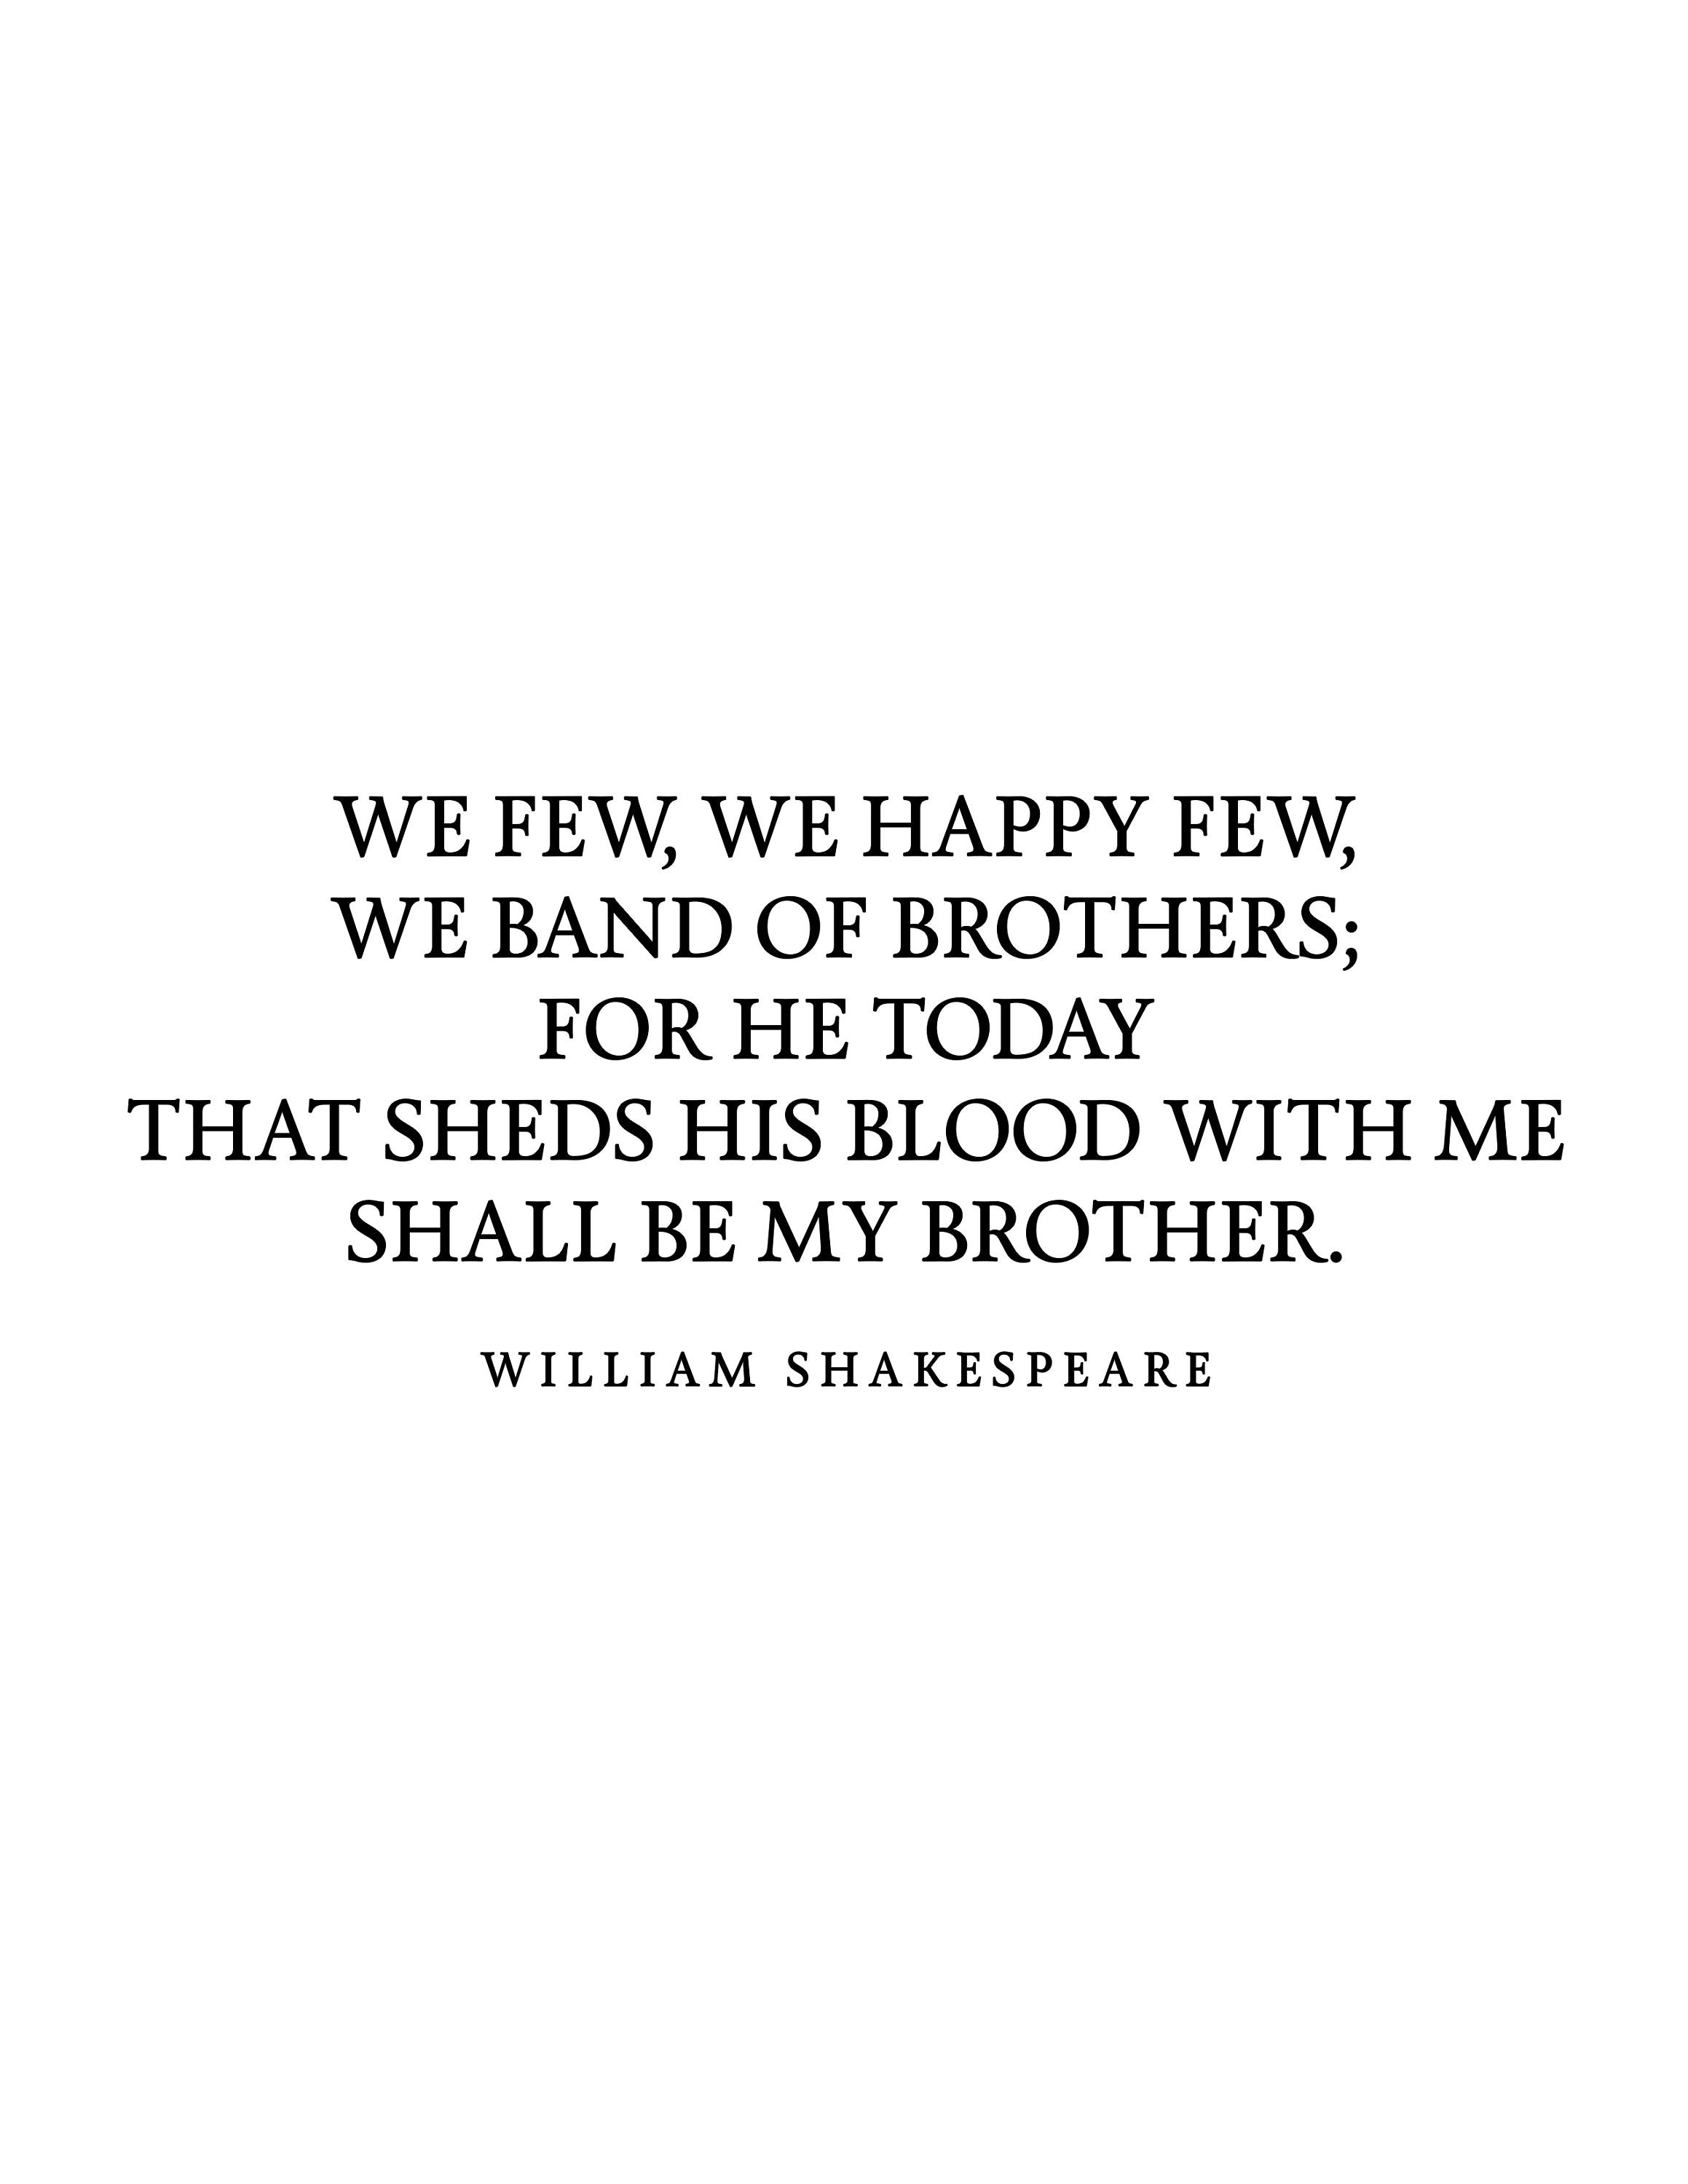 For he today that sheds his blood with me shall be my brother